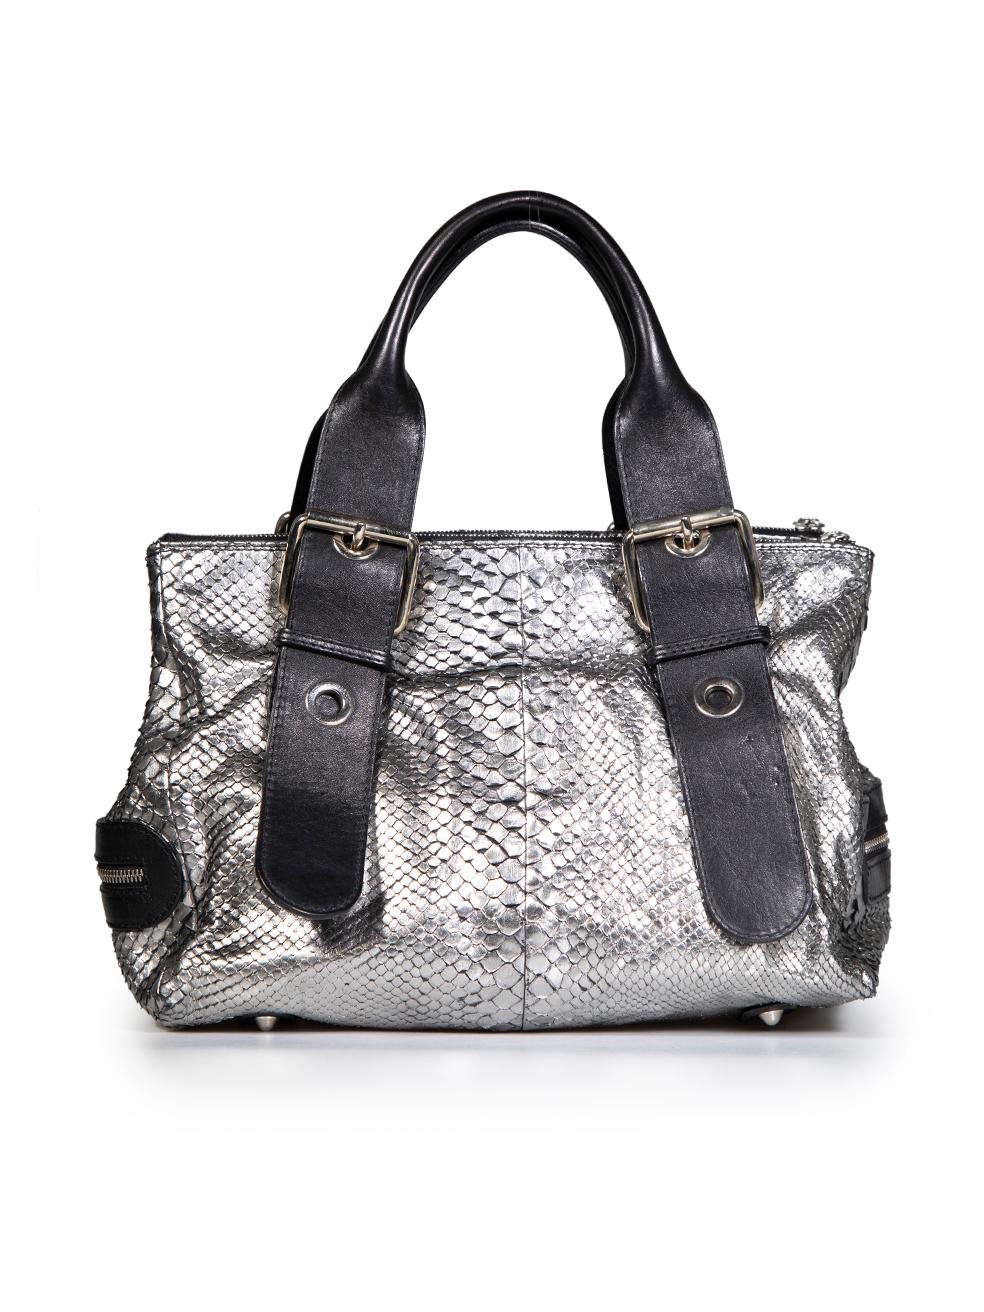 Chloé Silver Python Buckle Handbag In Good Condition For Sale In London, GB